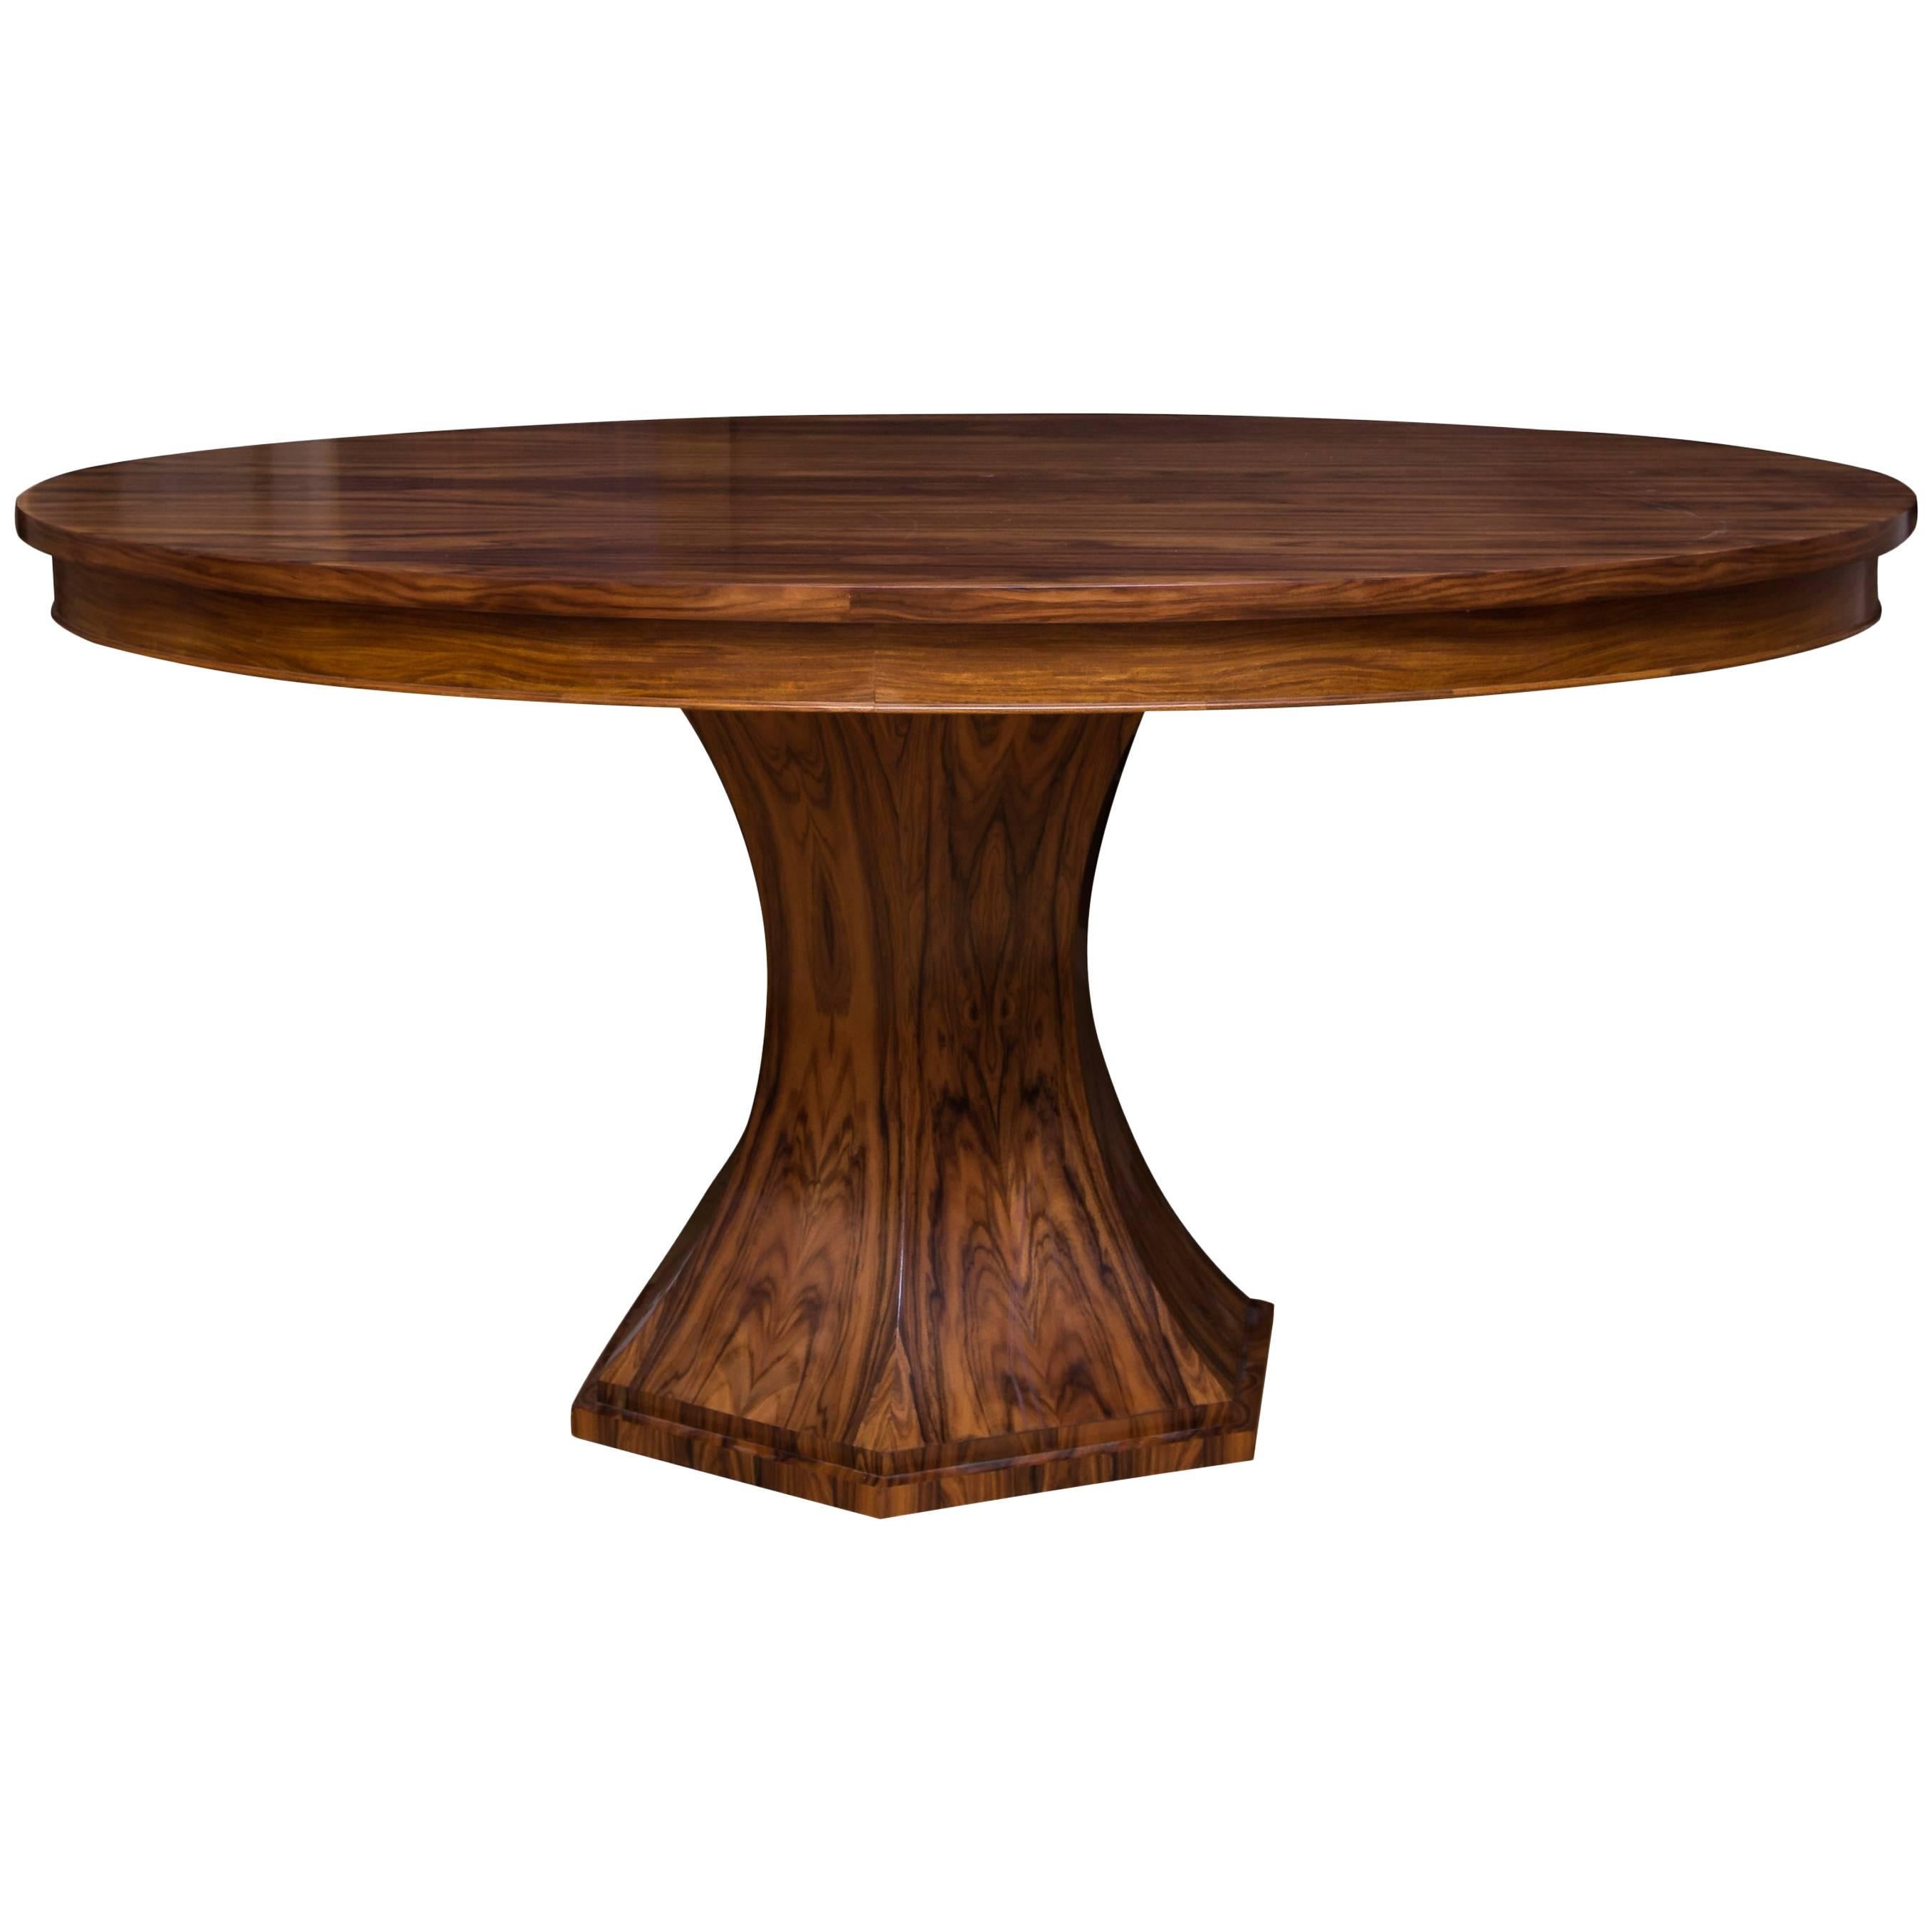 Elliptical Center Hall Table in Bolivian Rosewood by Gregory Clark For Sale